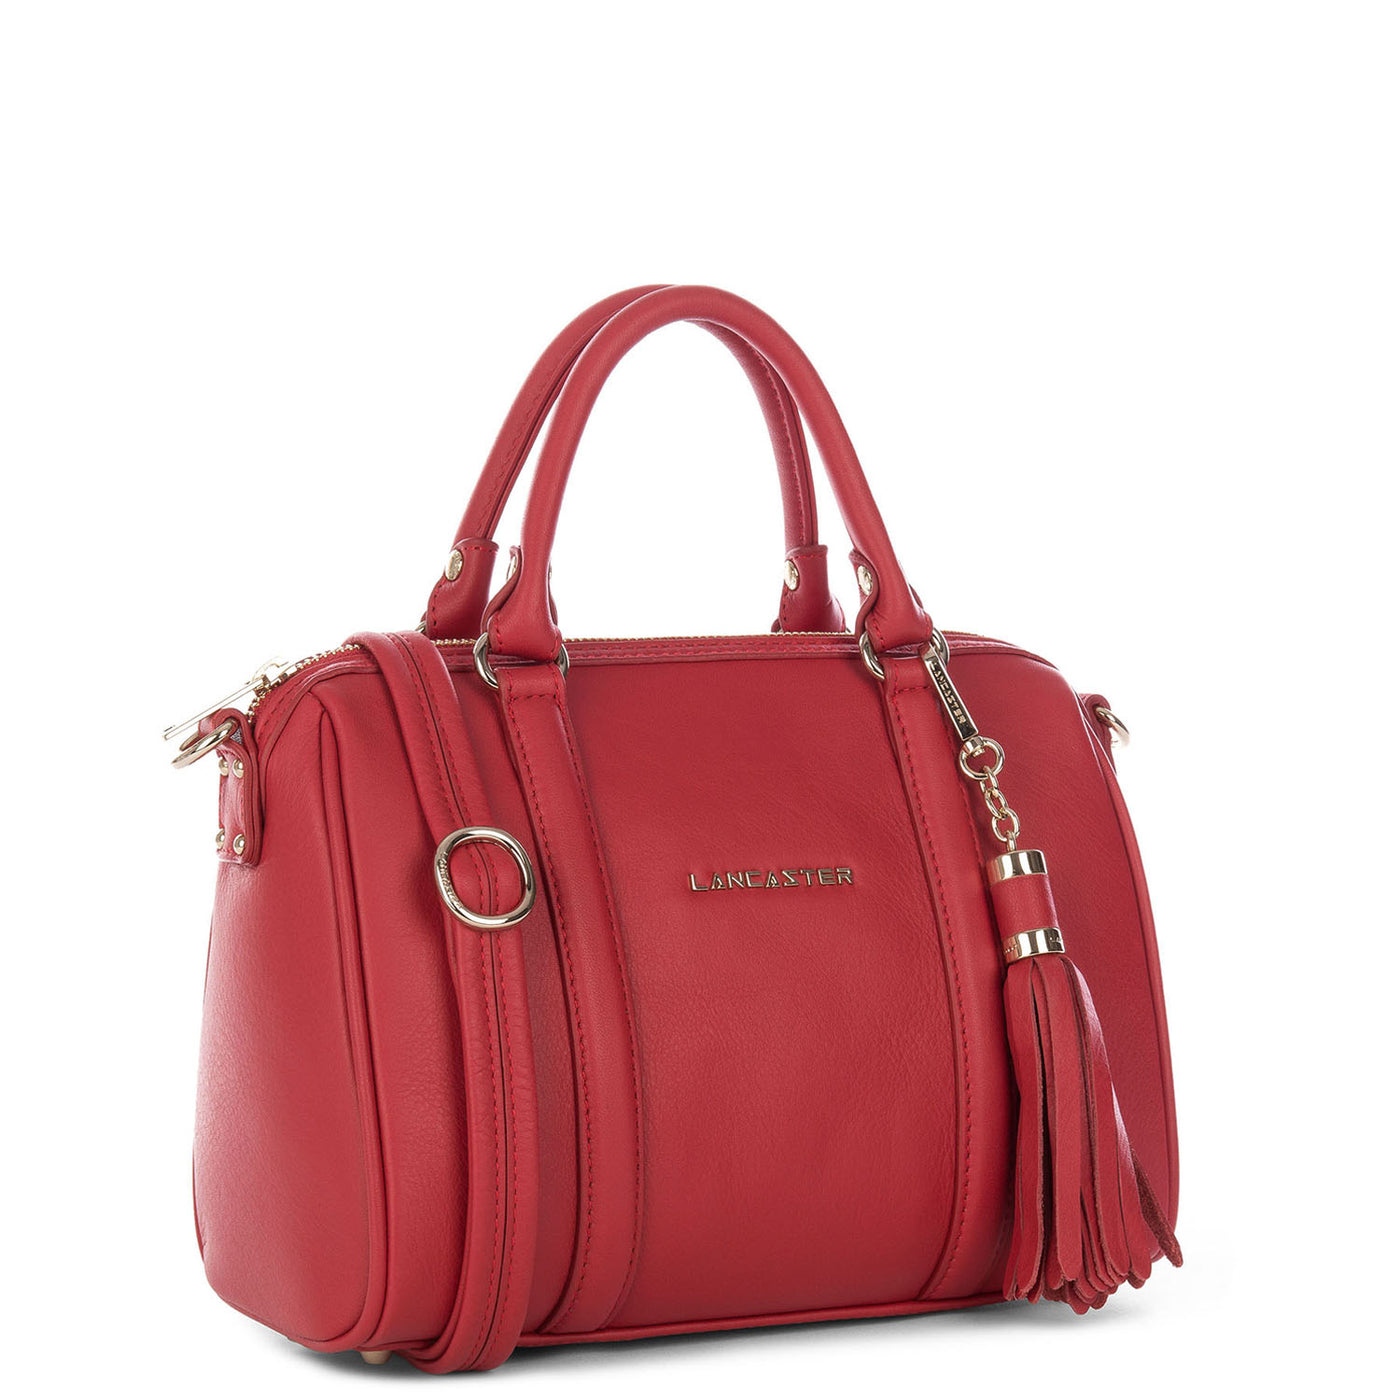 sac polochon - mademoiselle ana #couleur_rouge